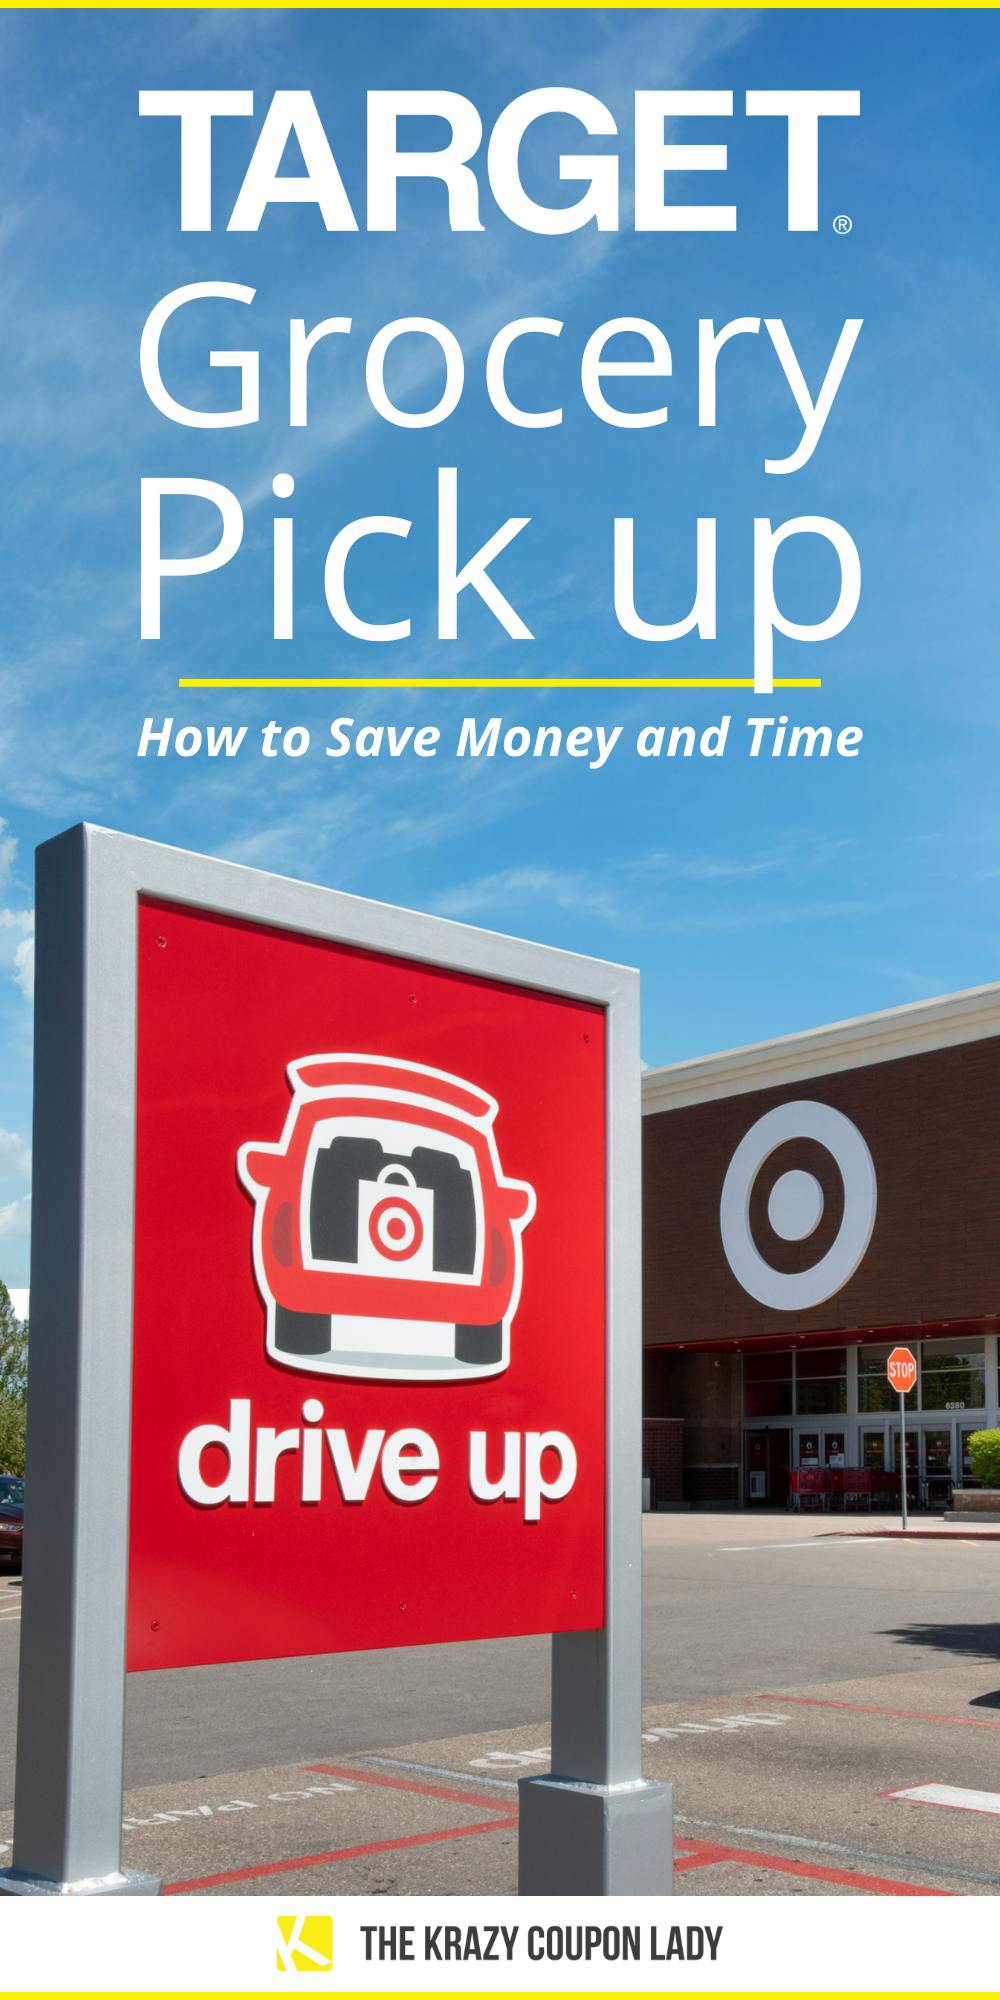 Everything You Need to Know About Target Drive Up for Curbside Groceries